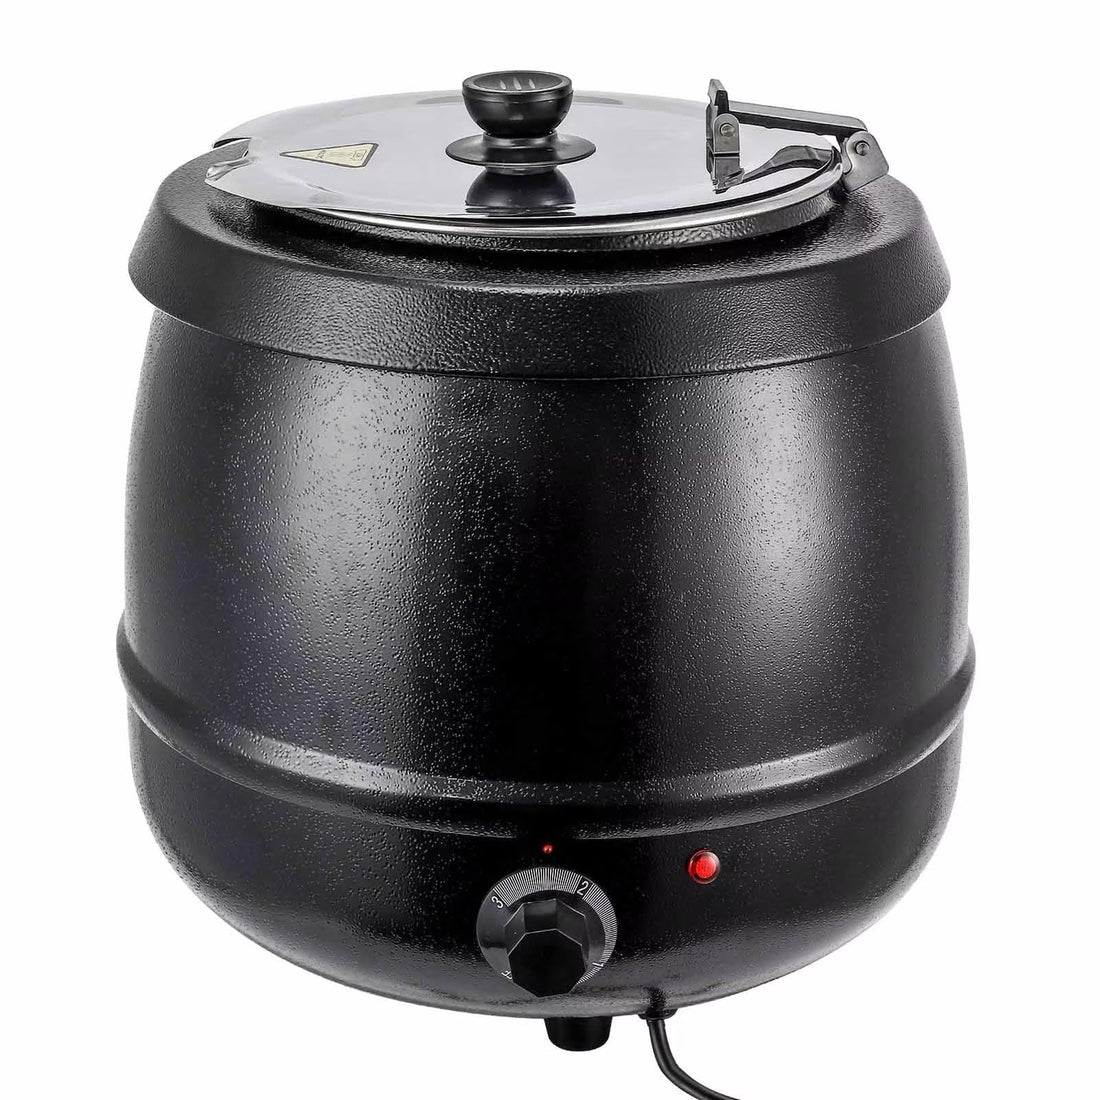 Commercial Grade Soup Kettle 10.5QT Soup Kettle Warmer with Hinged Lid Black